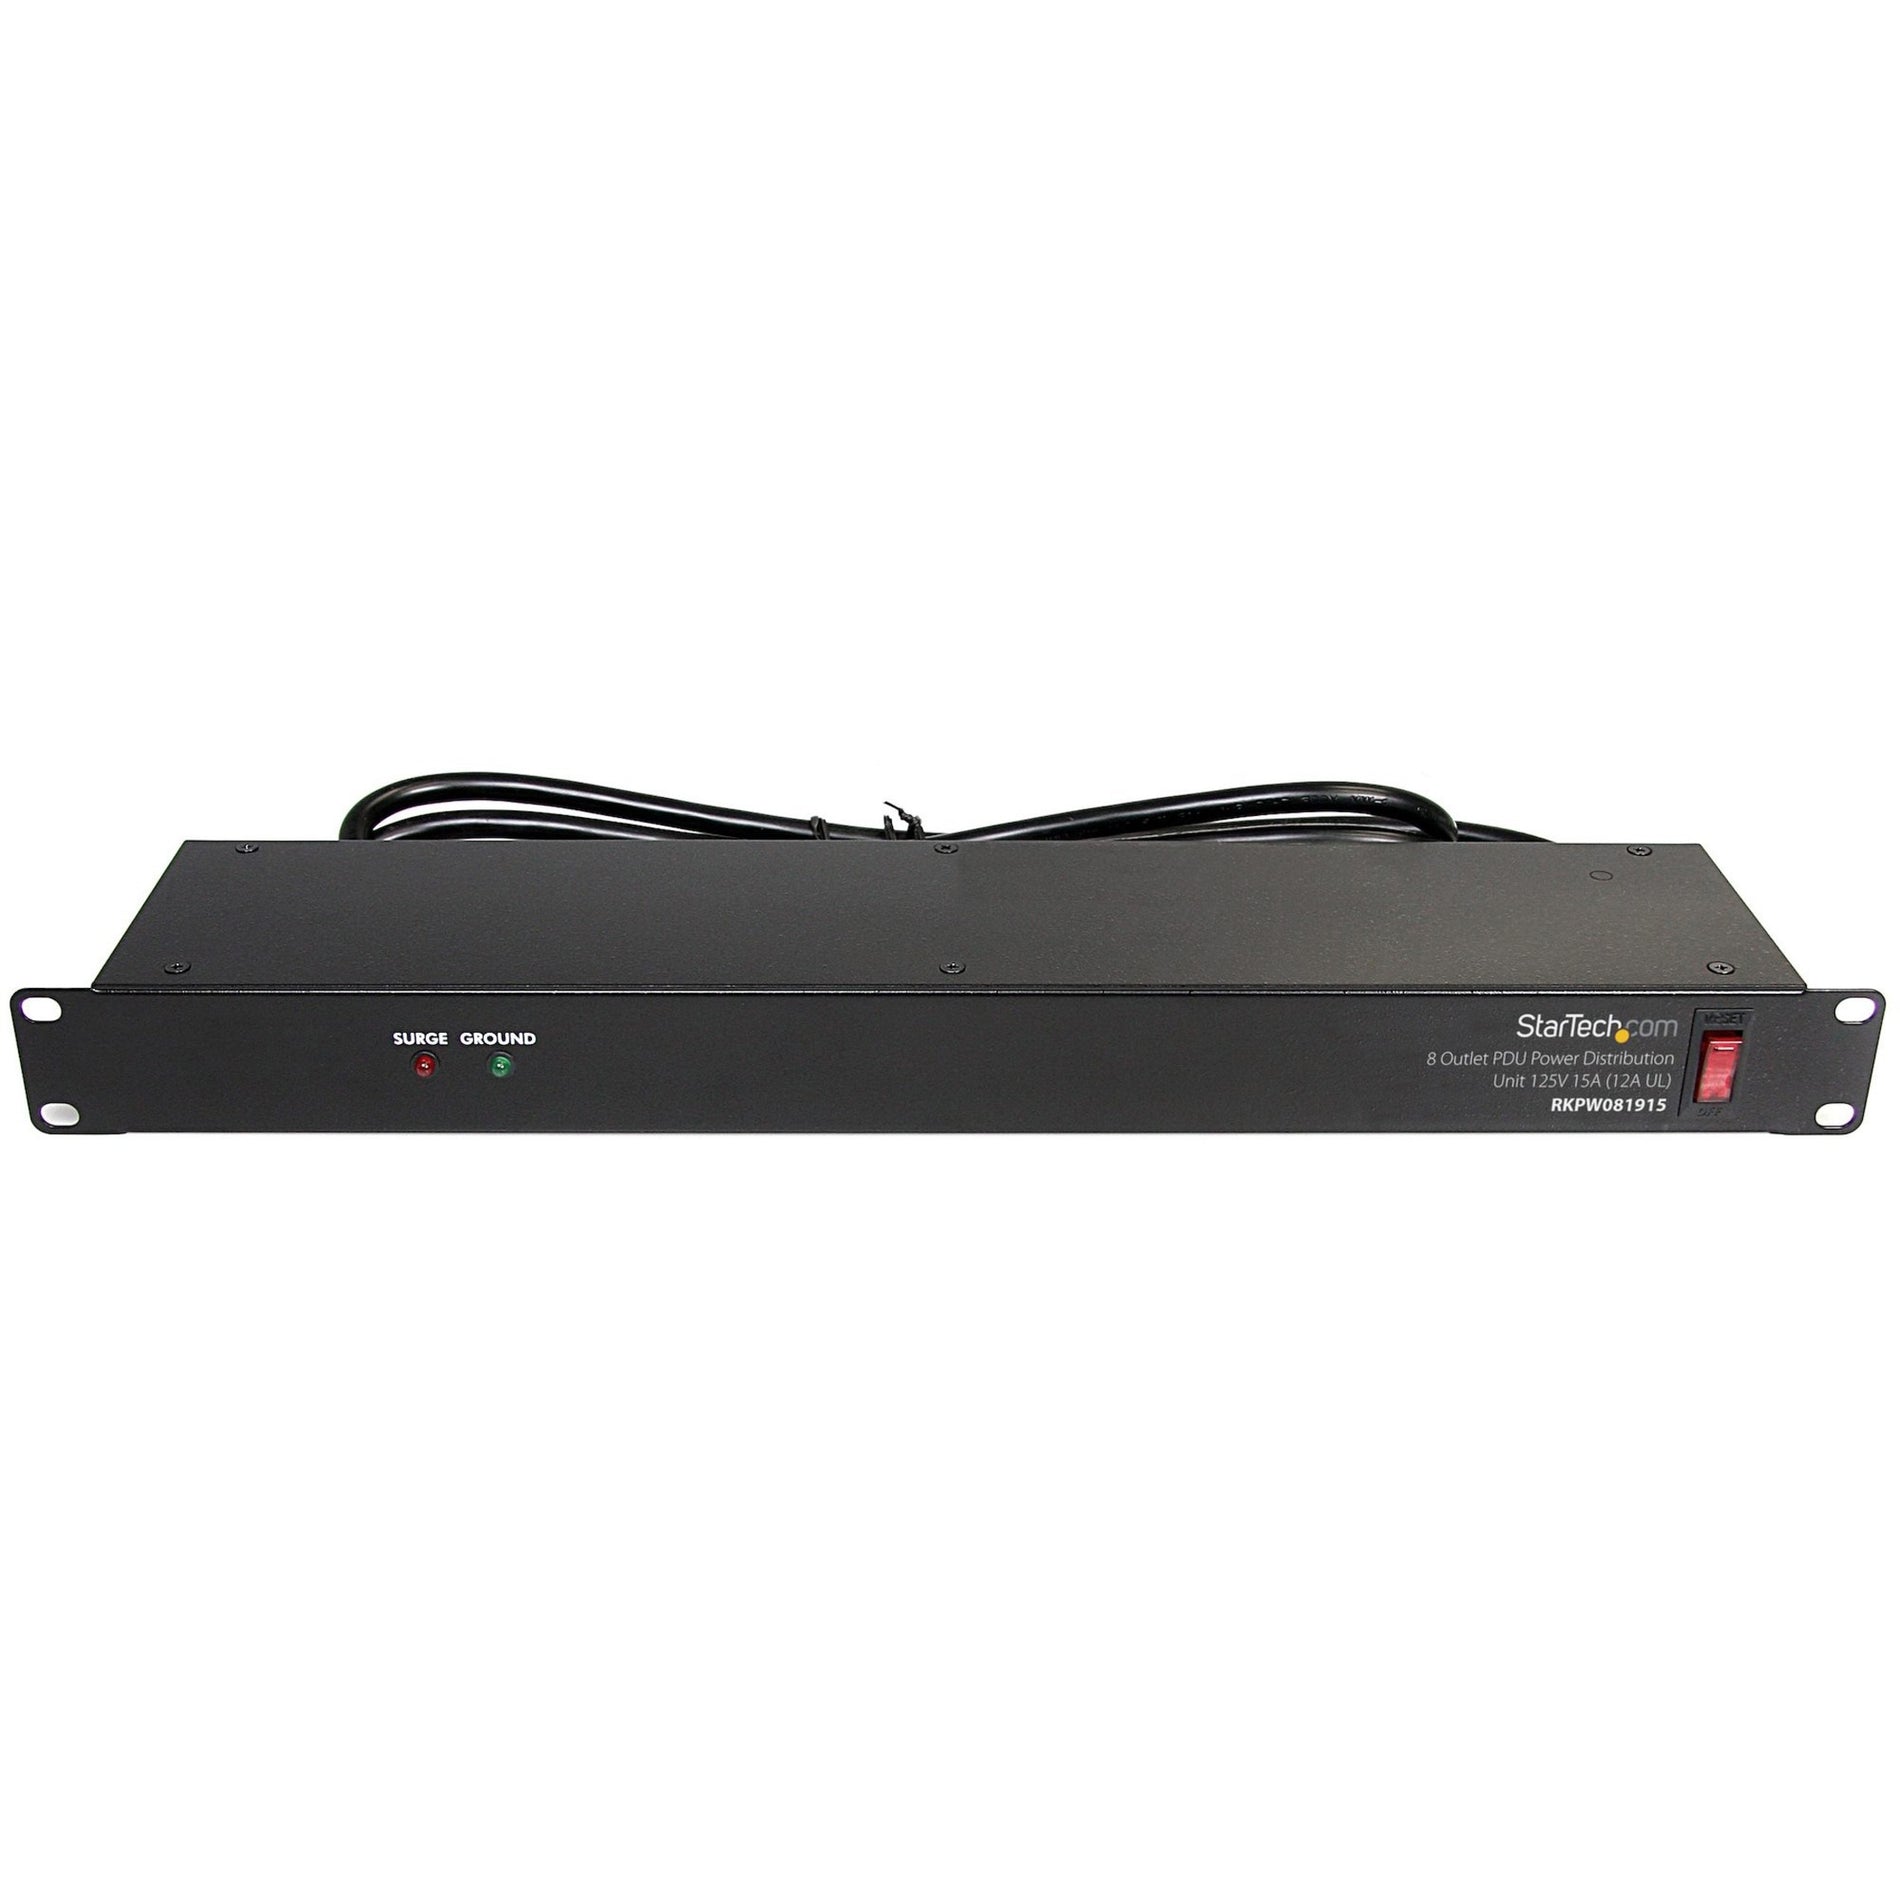 StarTech.com RKPW081915 Rackmount PDU with 8 Outlets and SurgeProtection - 1U, 15A, 120V AC